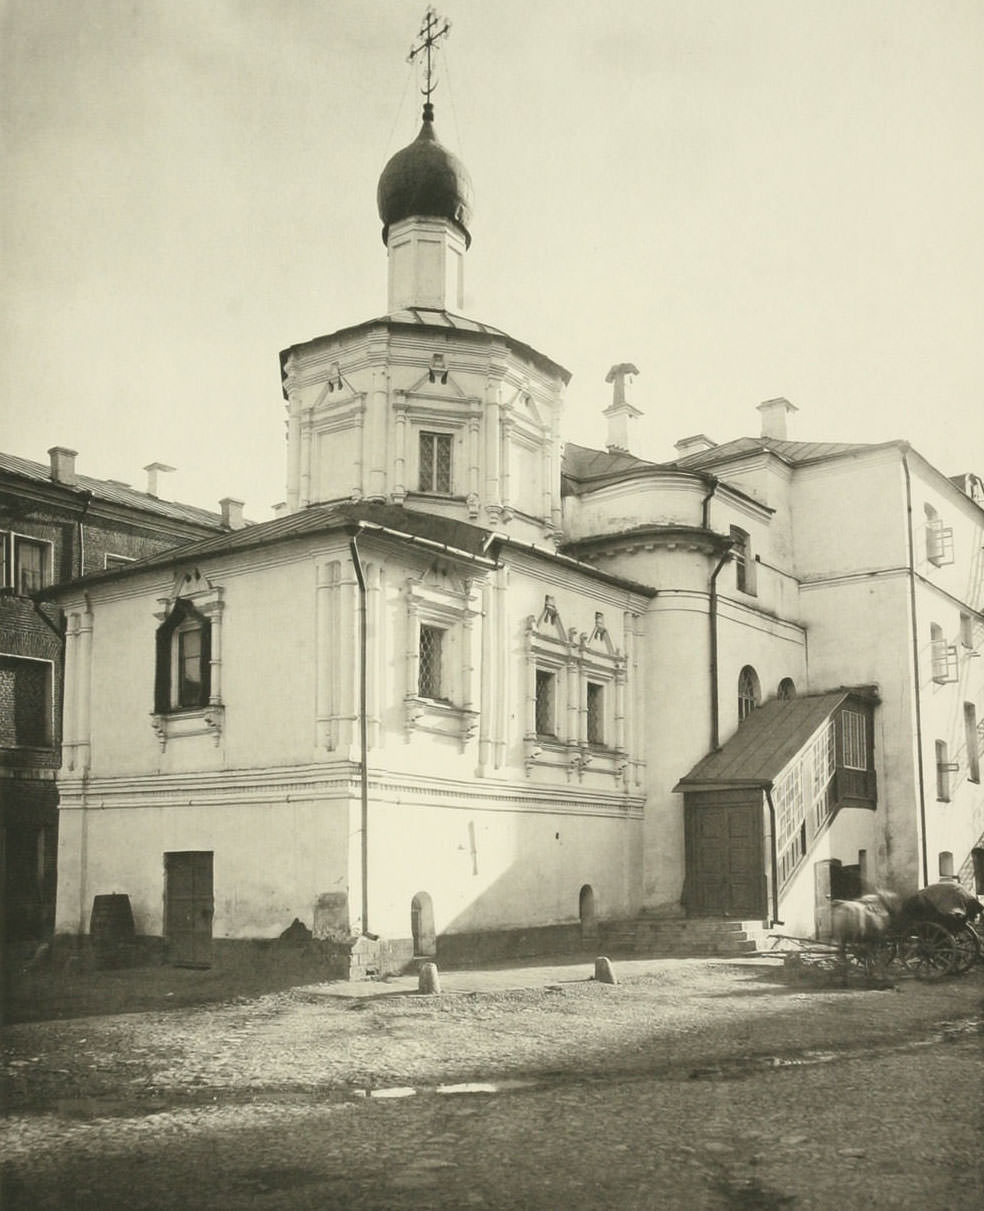 A Church in Chizhovsky Section, 1880s.